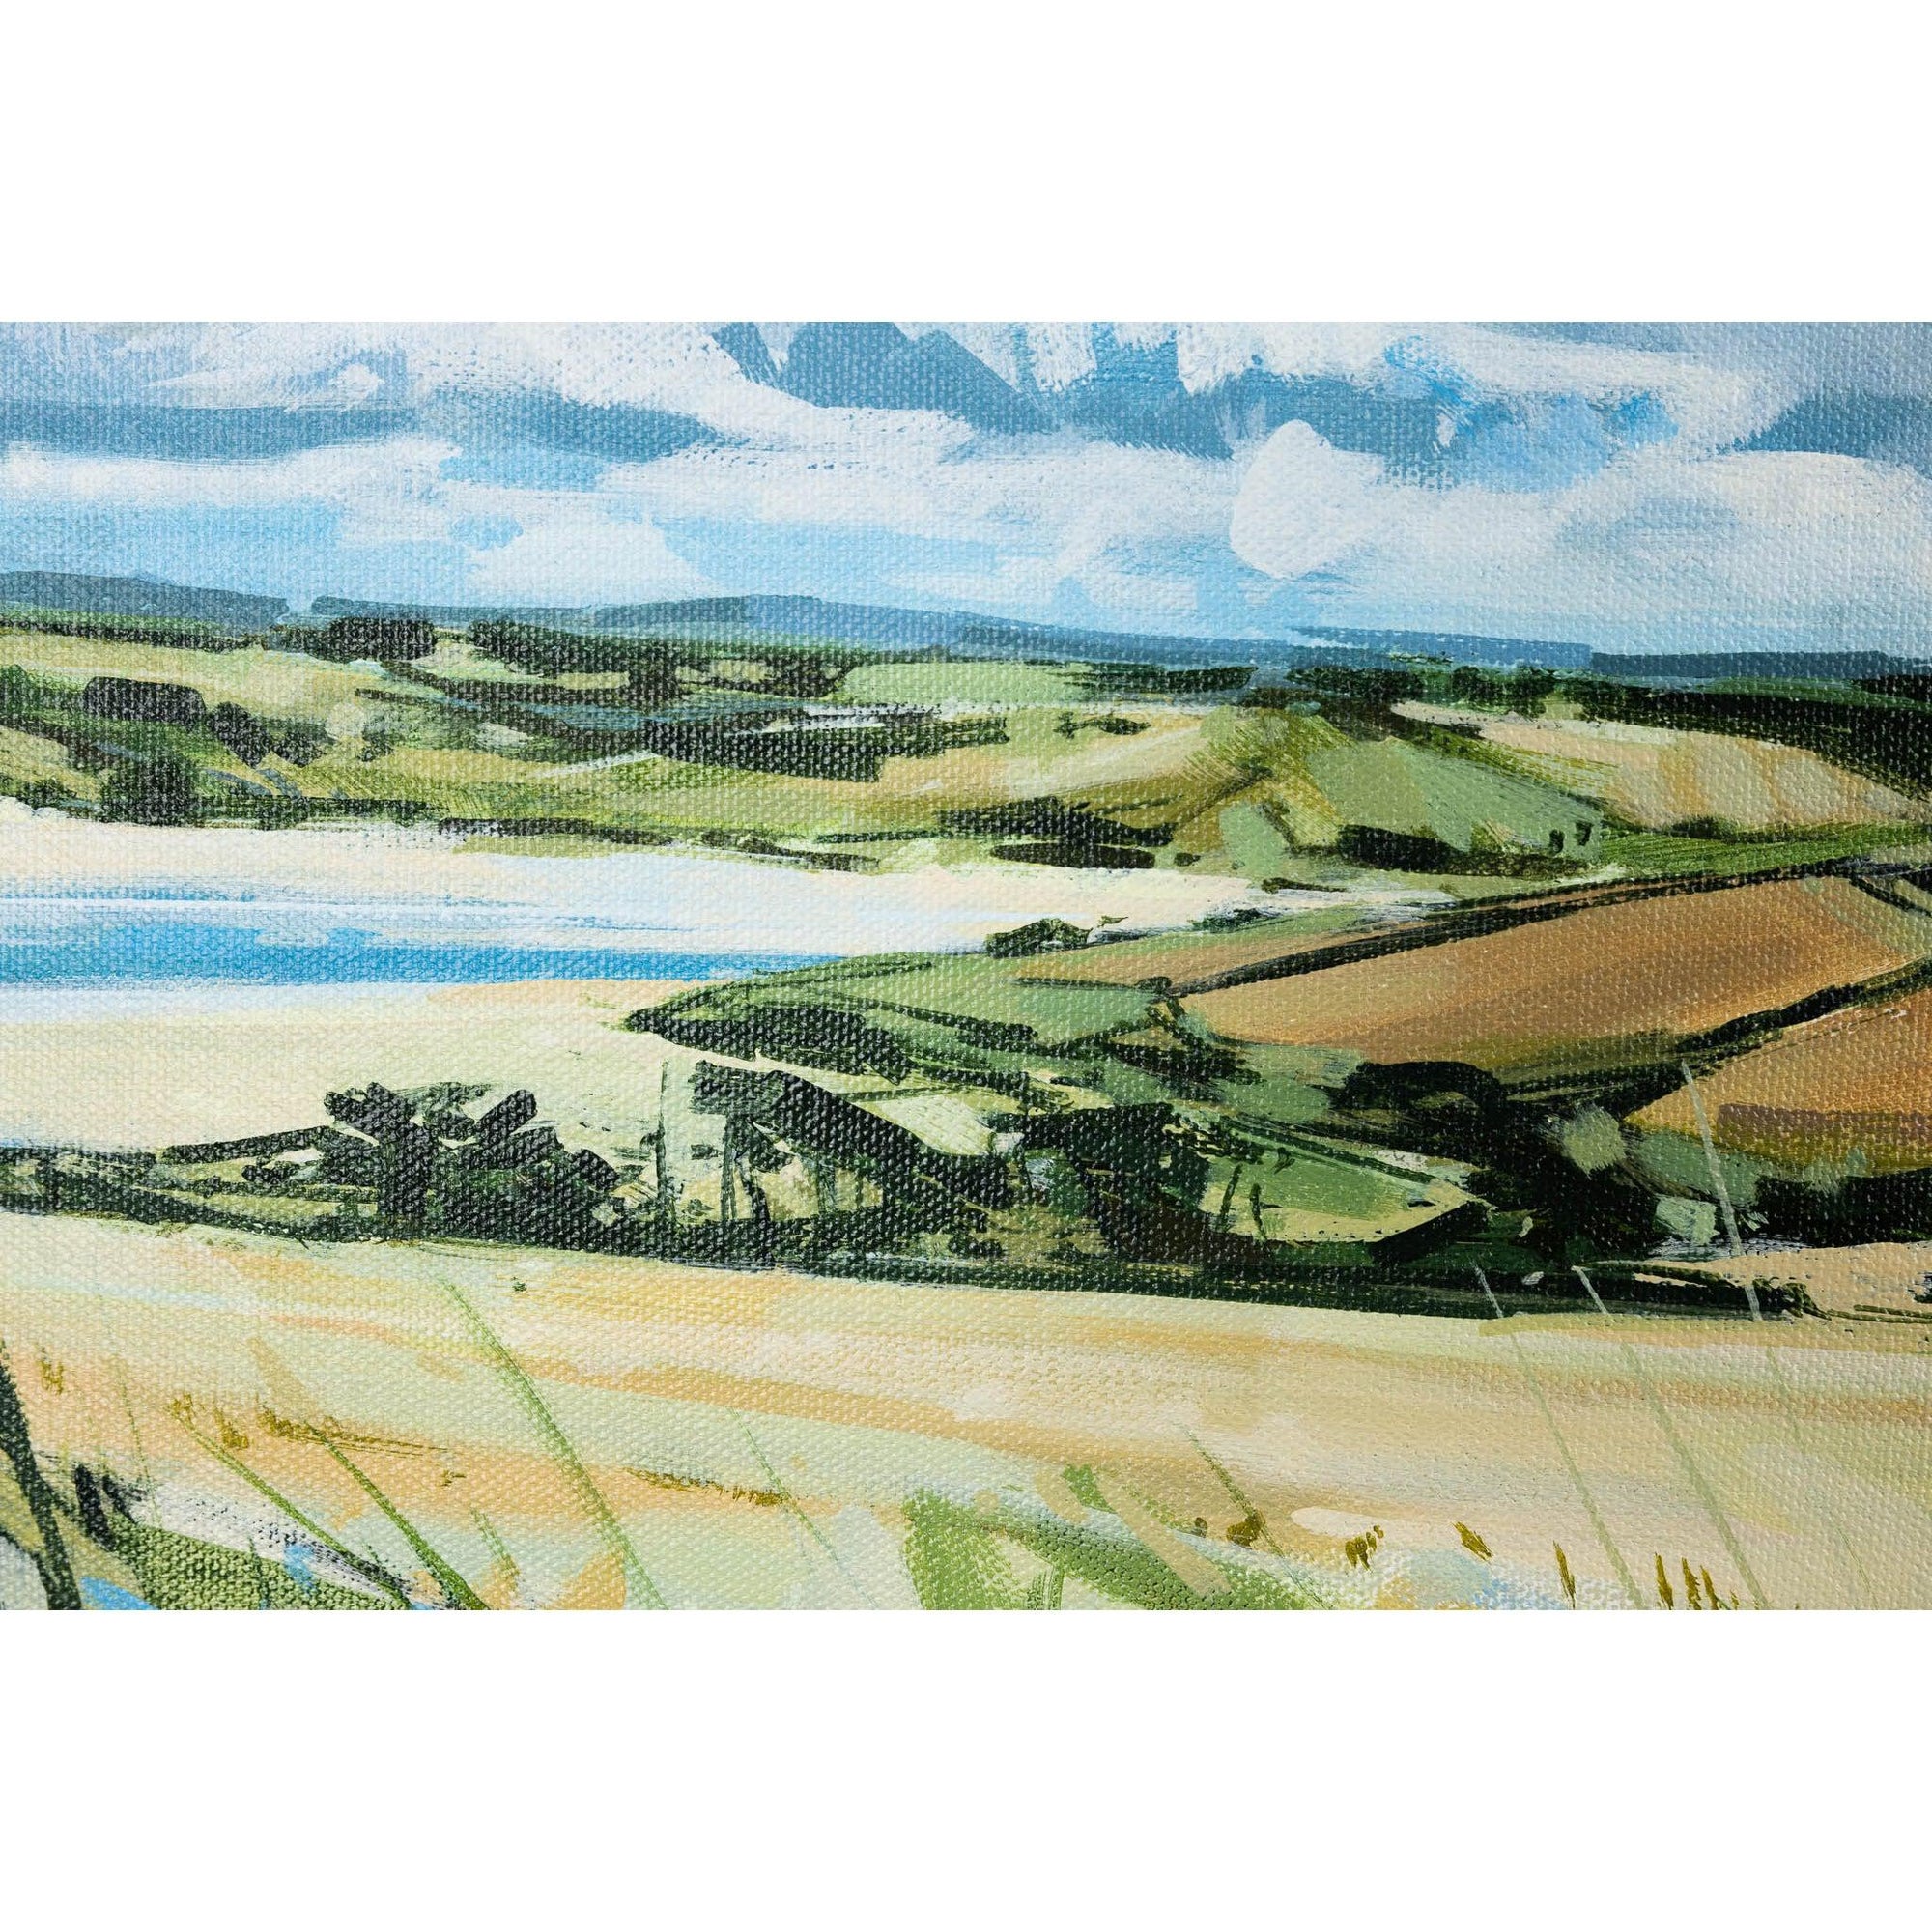 ’Summer Fields By The Estuary’ acrylic and oil on canvas by Imogen Bone. Available at Padstow Gallery, Cornwall